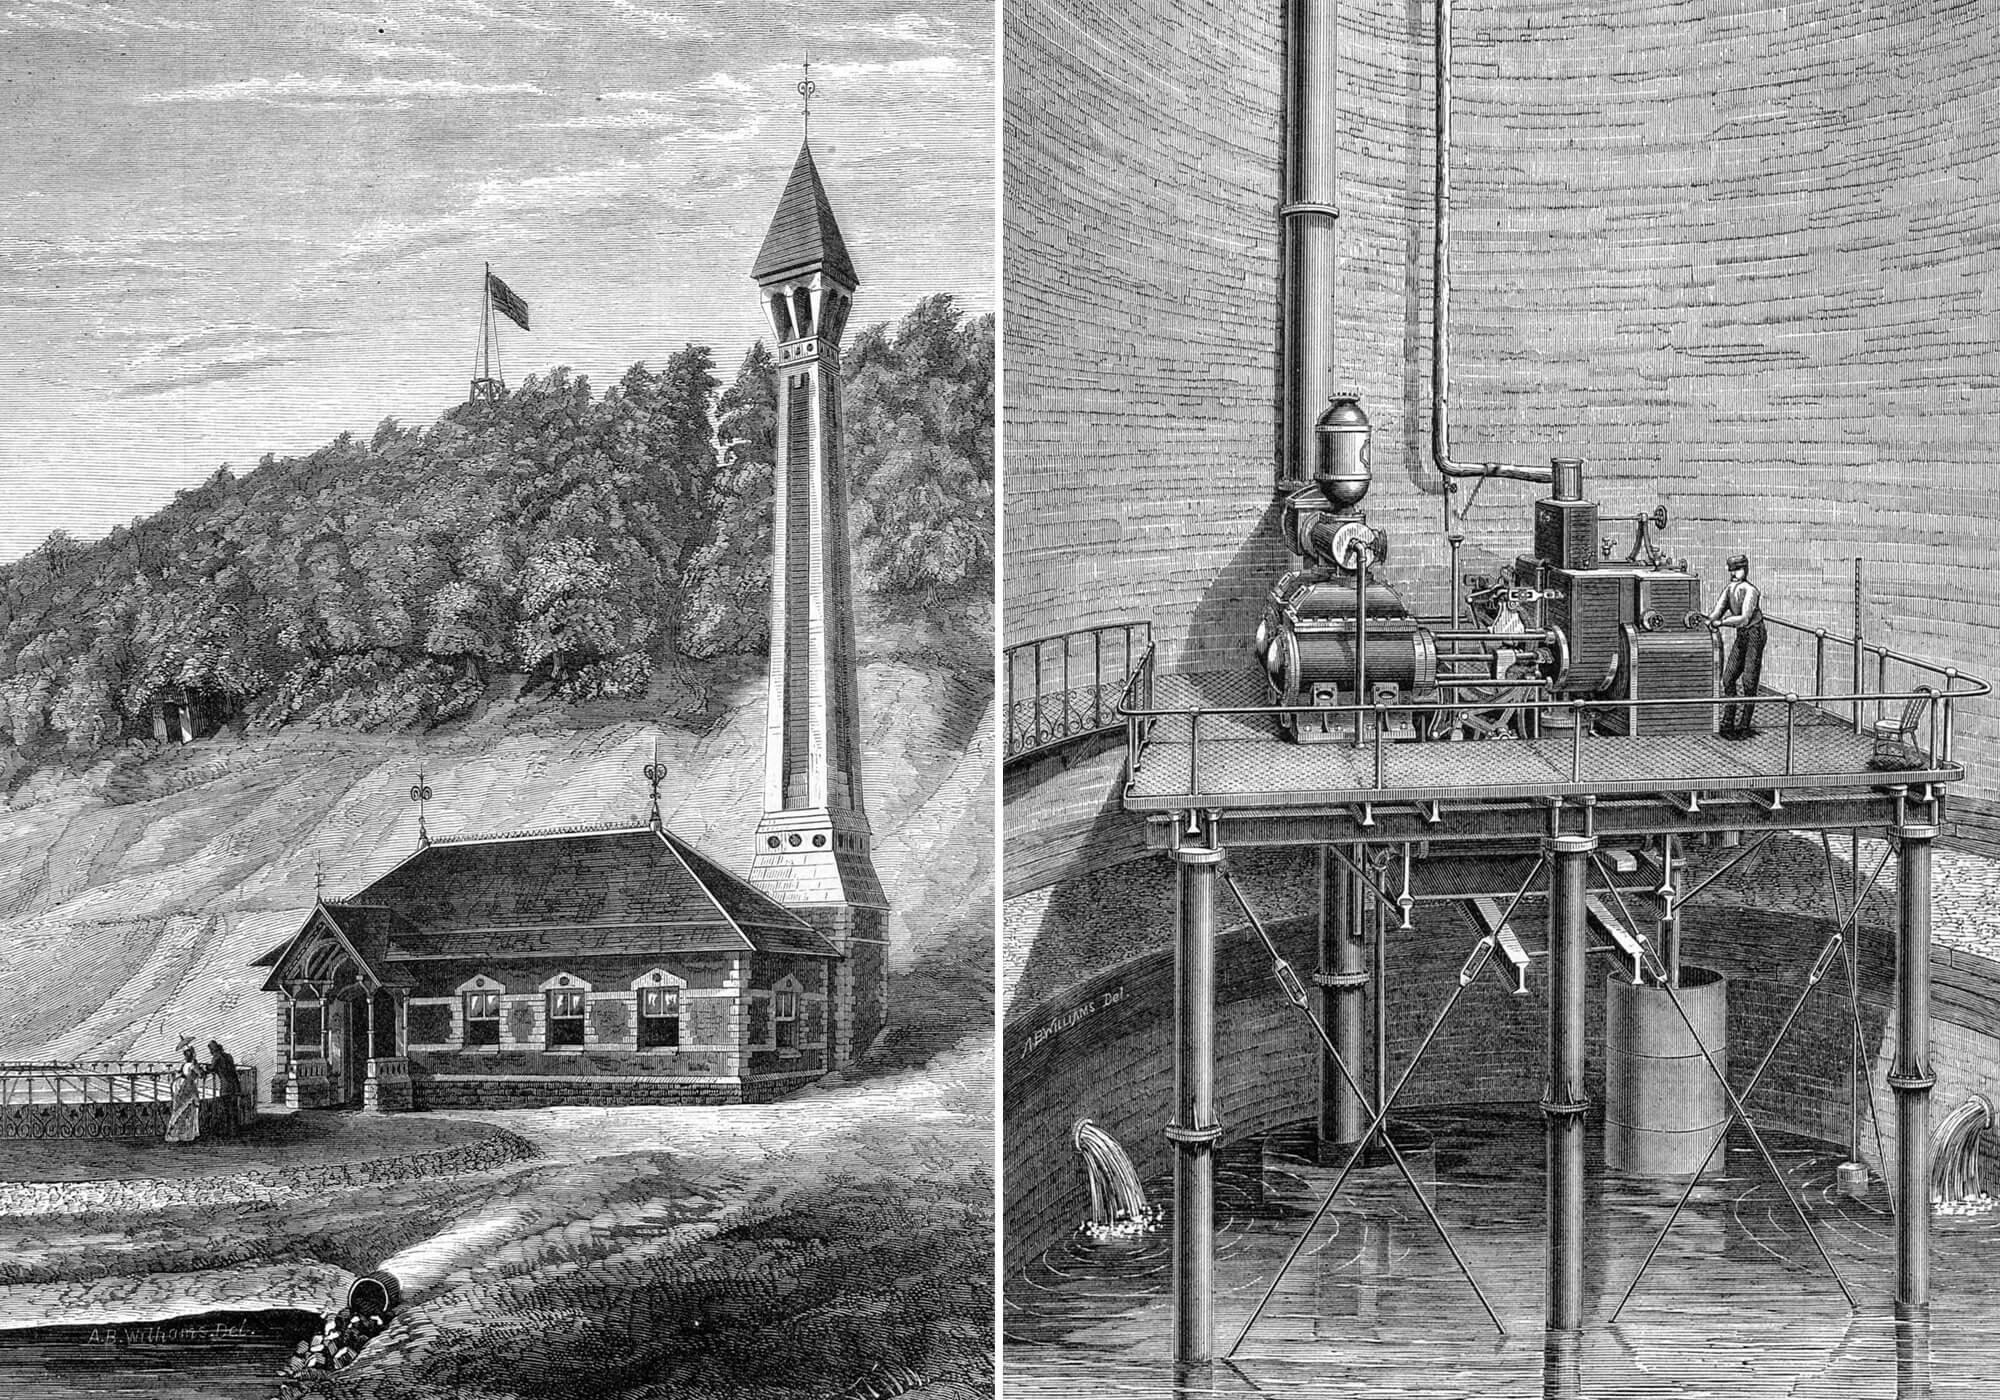 The exterior and interior of the well as depicted in 1872, soon after completion. Image via The Engineer